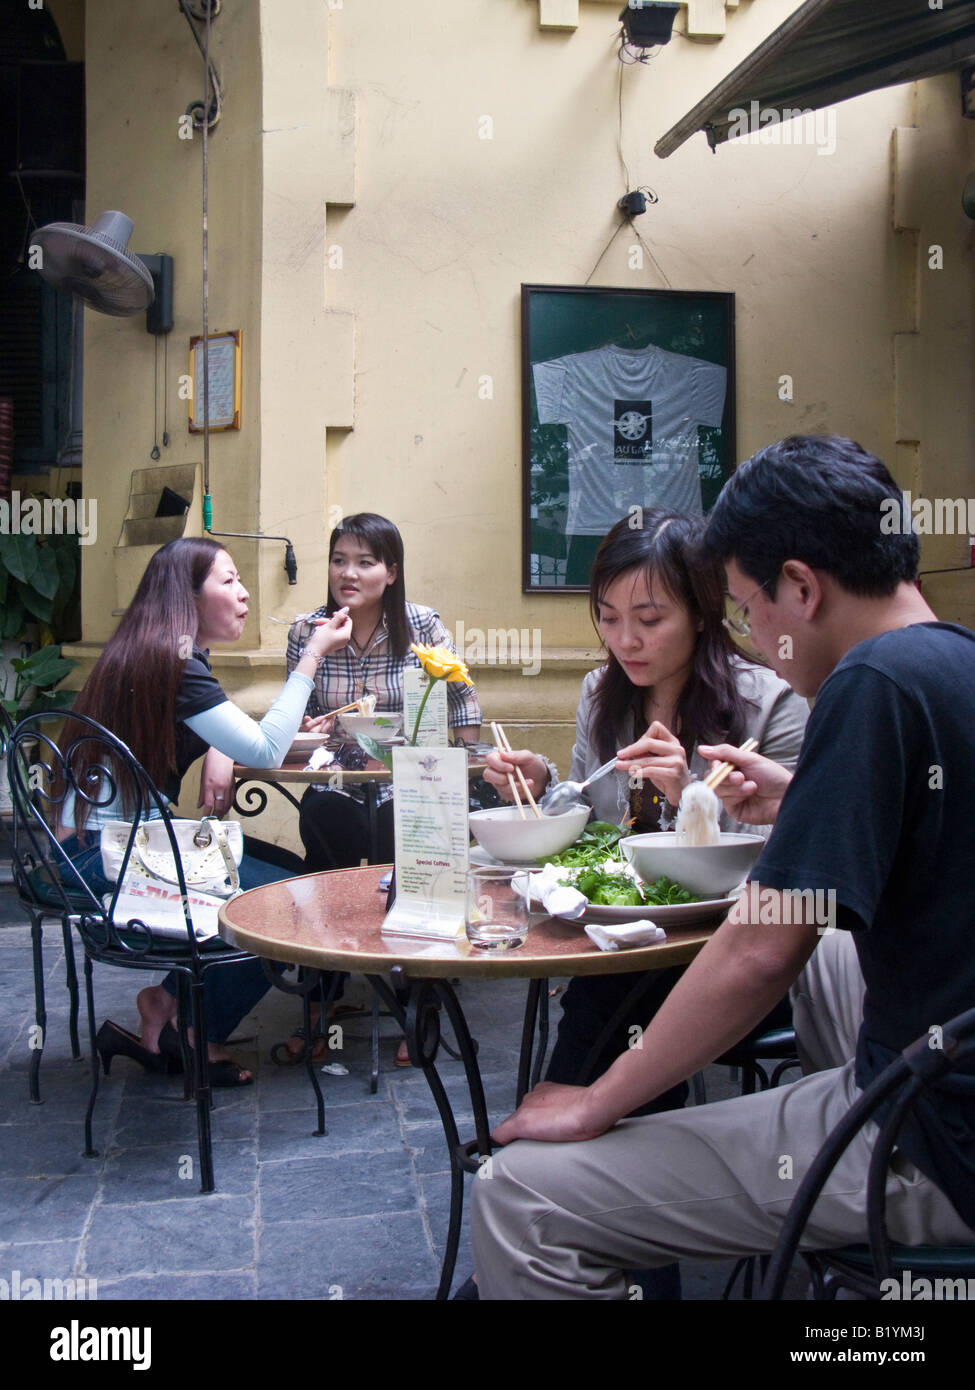 people eating lunch at cafe, Hanoi, Vietnam Stock Photo - Alamy